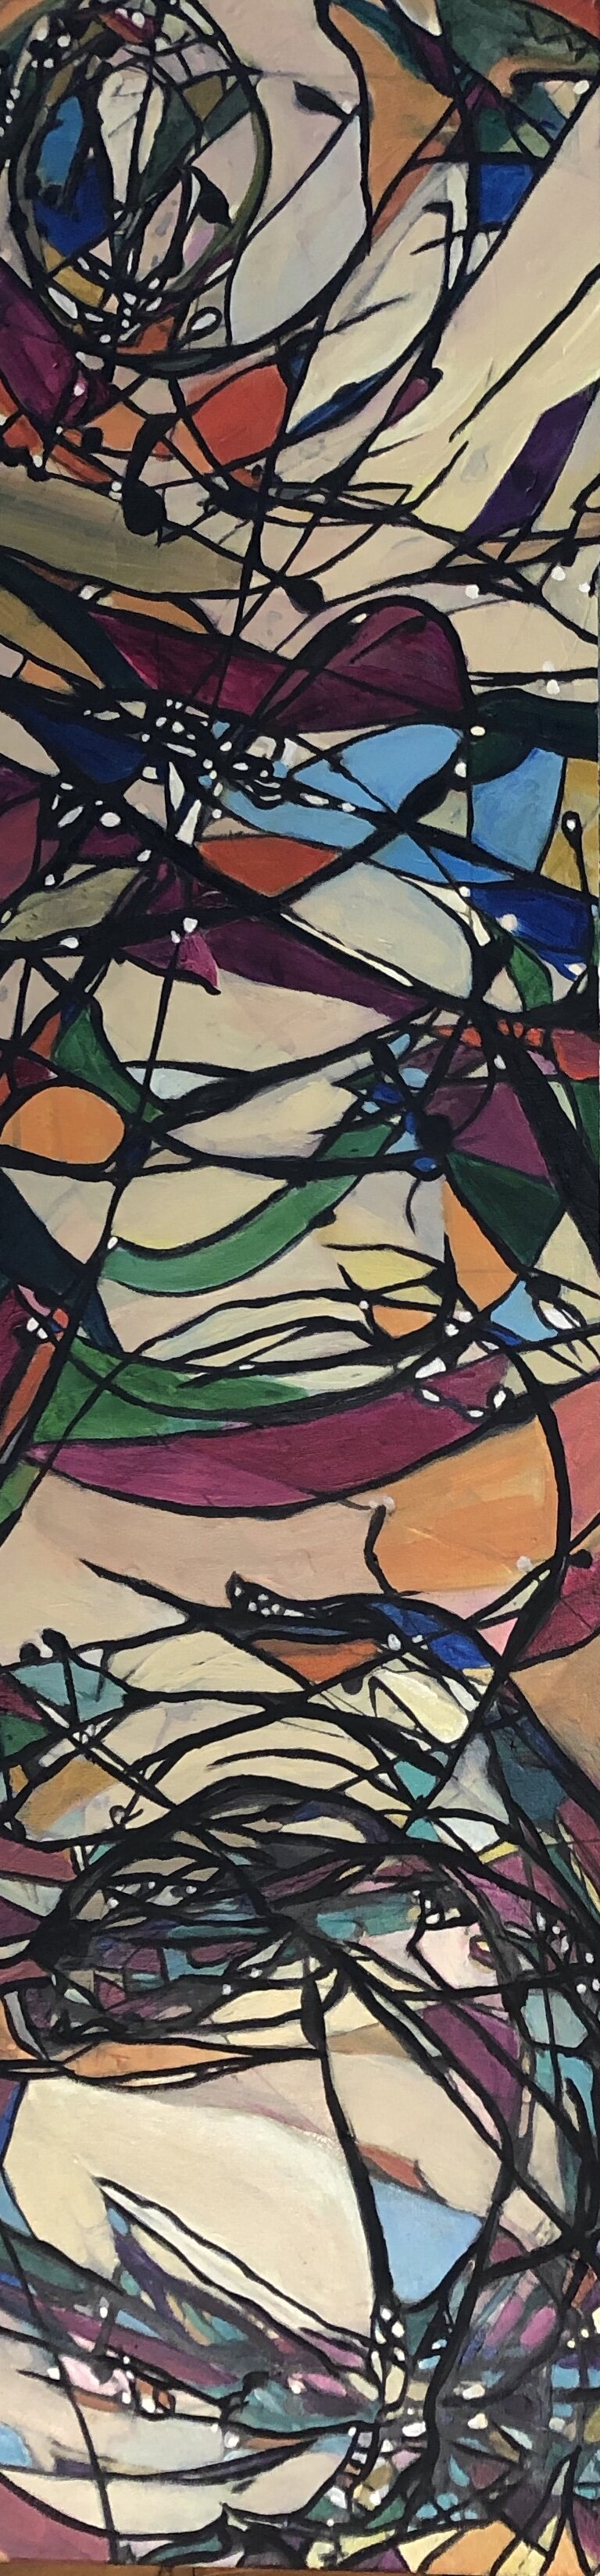 Stained glass 2018.jpeg